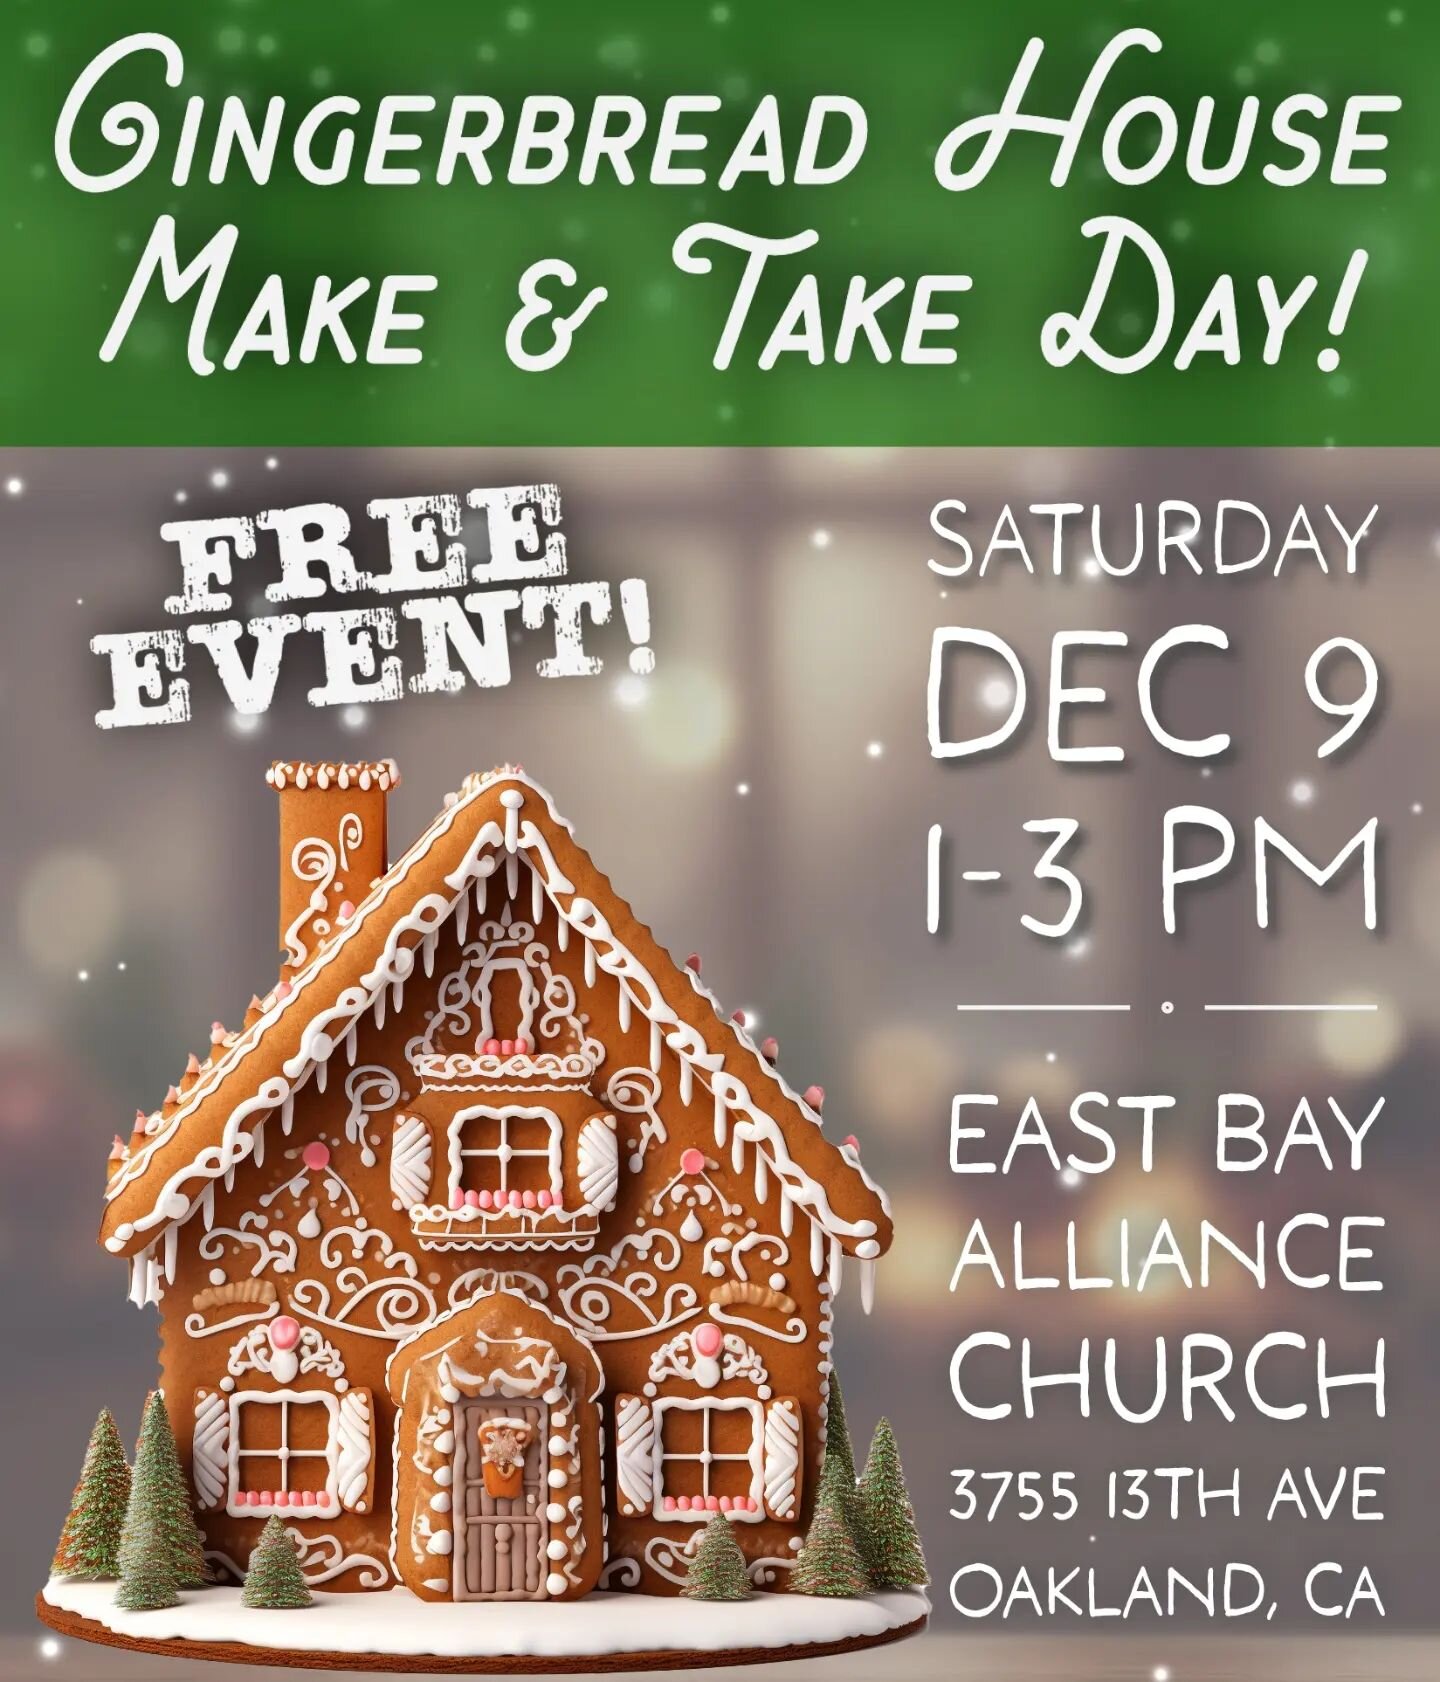 Are you excited about Christmas as much as we are?! 🎄☃️🌟

We will be hosting a gingerbread house making event! It's not limited to one per family; everyone can make their own! See details below on how to sign up! ❄️🦌🛷

📆12/9 Saturday
🕐1-3pm
📍 